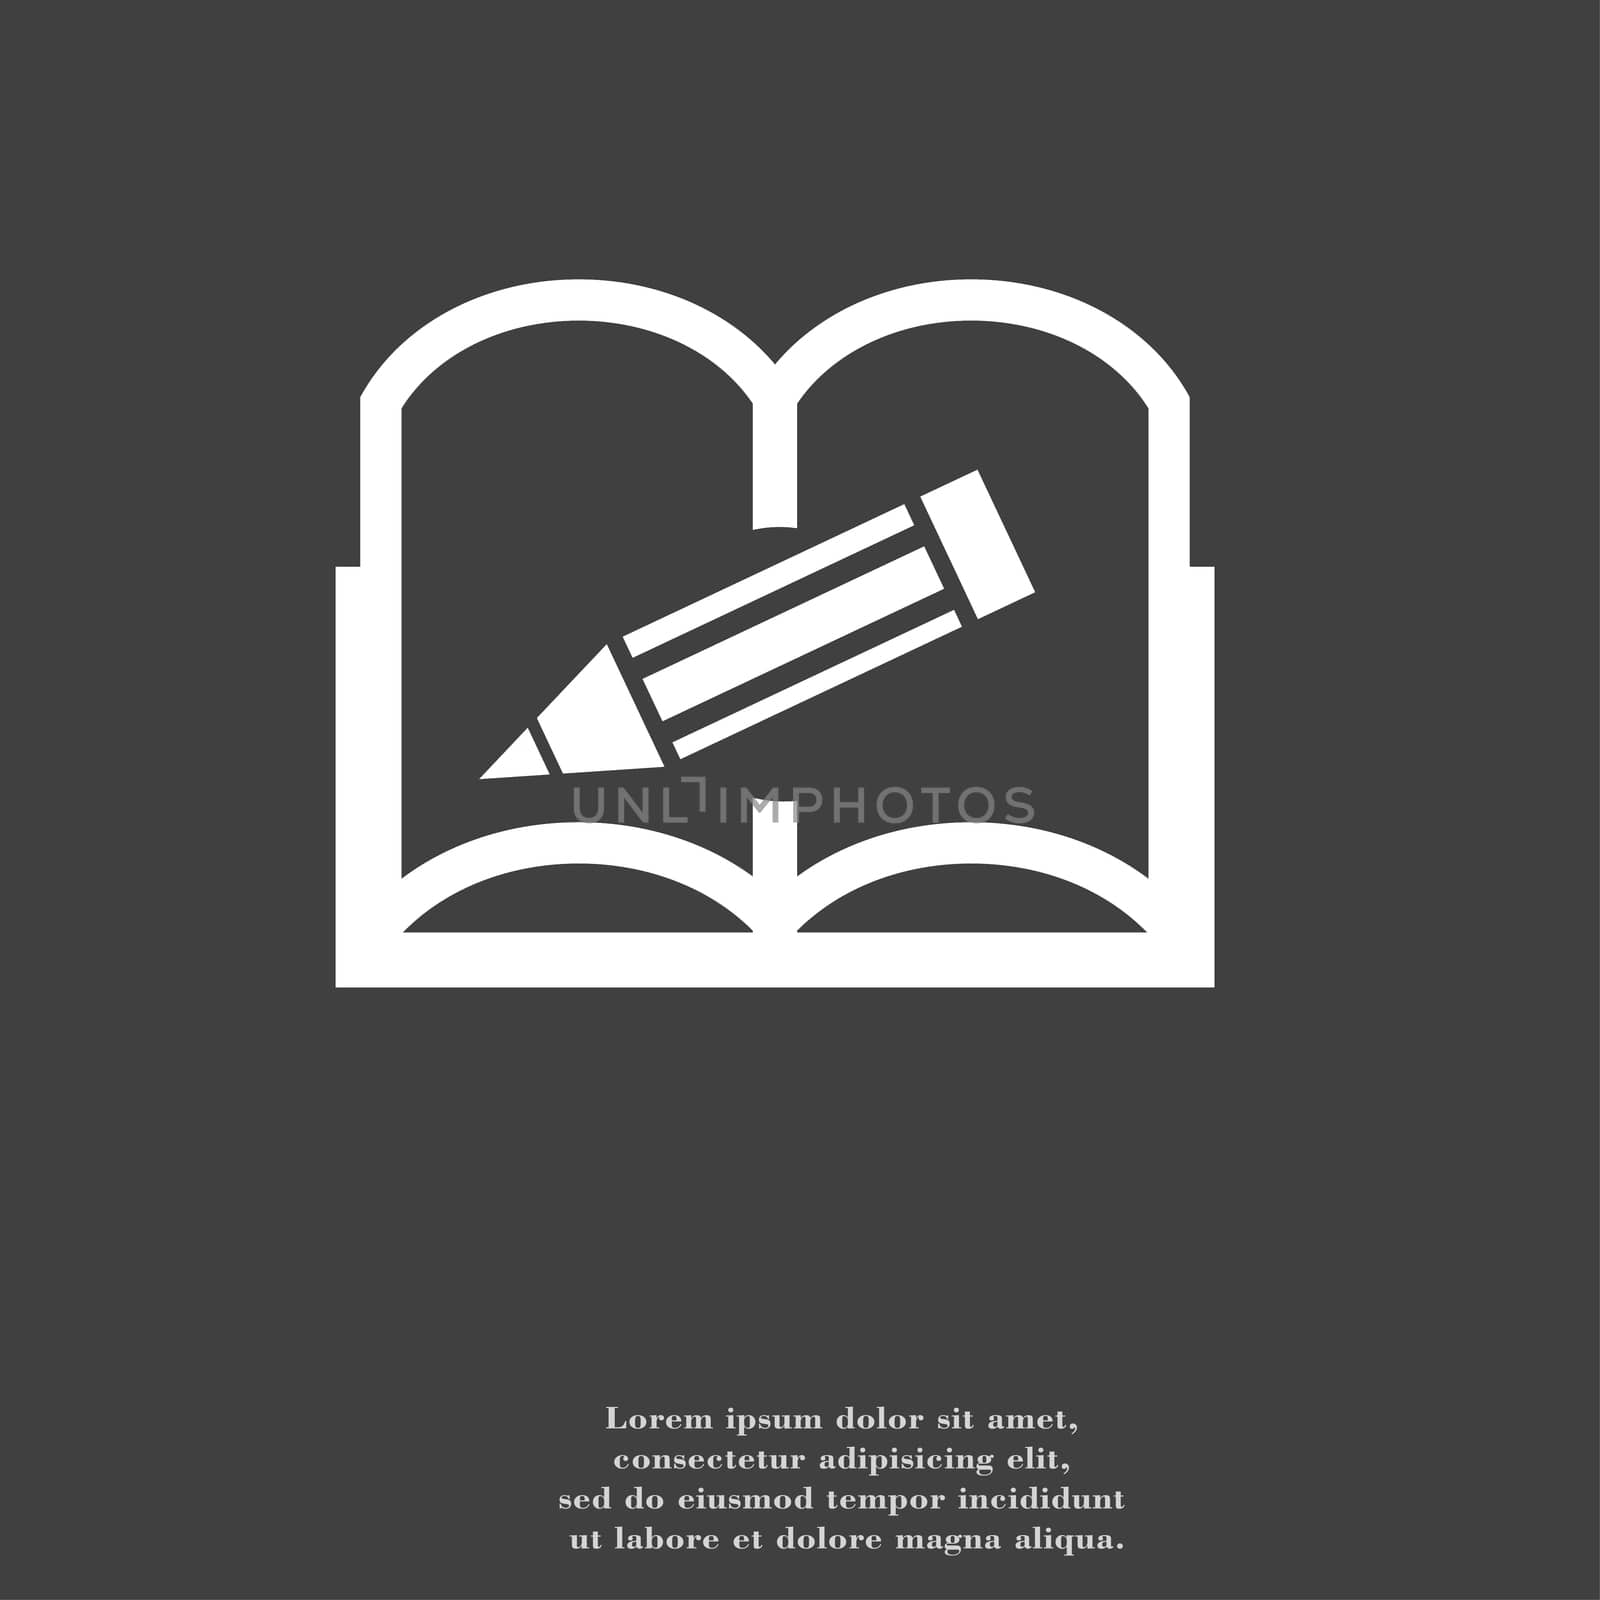 Open book icon symbol Flat modern web design with long shadow and space for your text. illustration